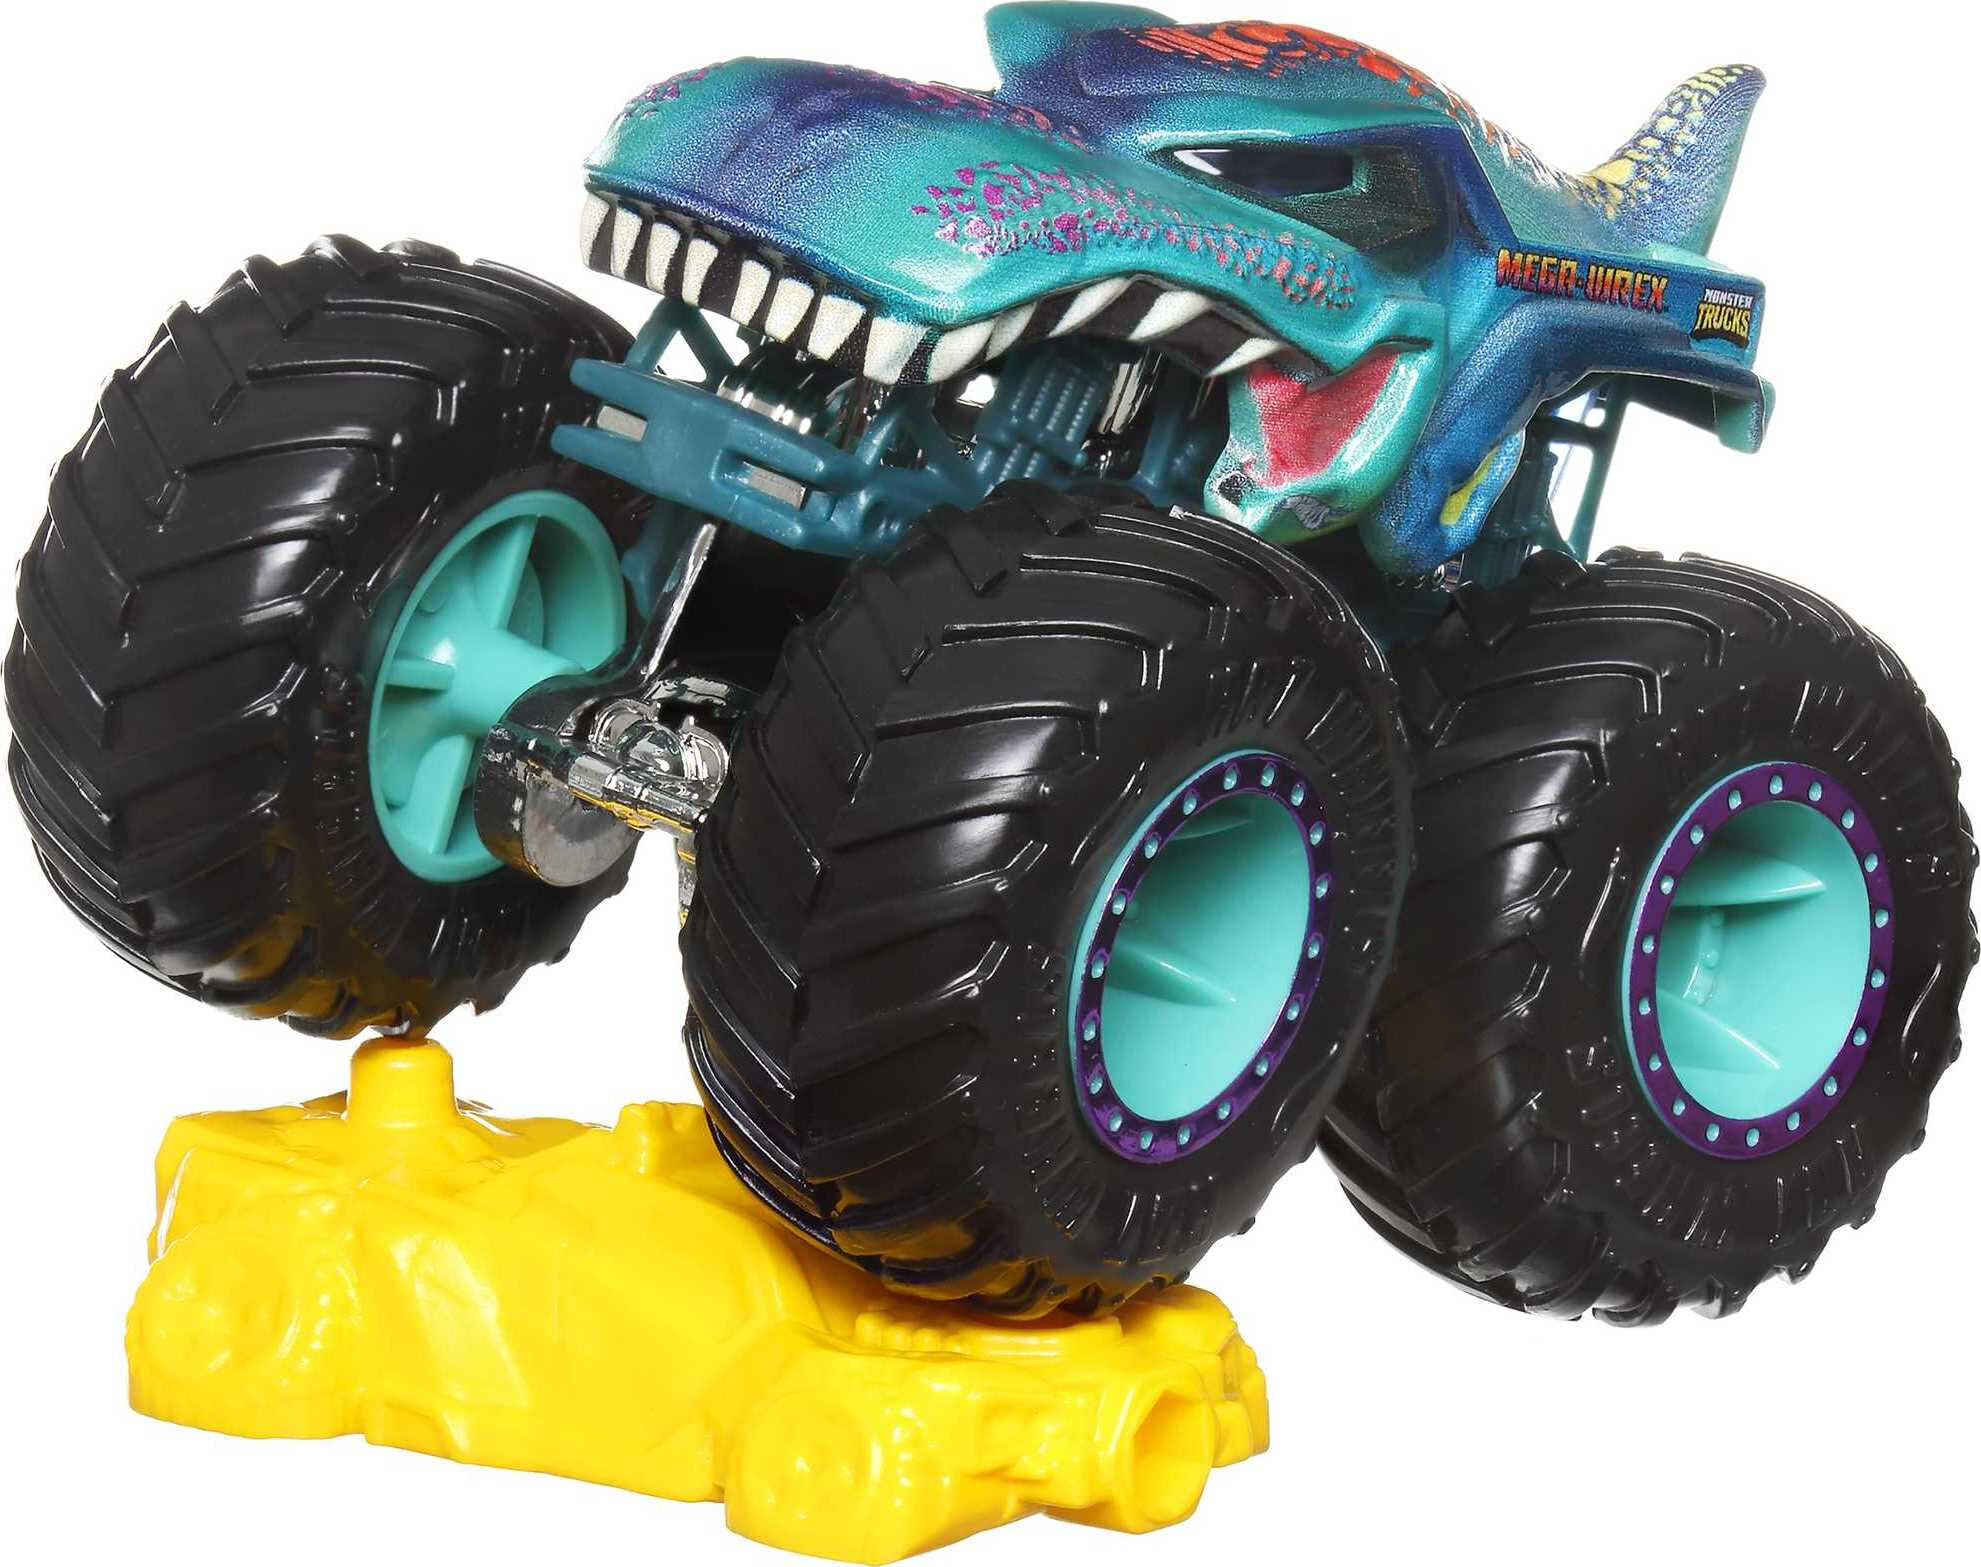 Hot Wheels Monster Trucks, 1:64 Scale Toy Truck & 1 Crushable Car (Styles May Vary) - image 5 of 6